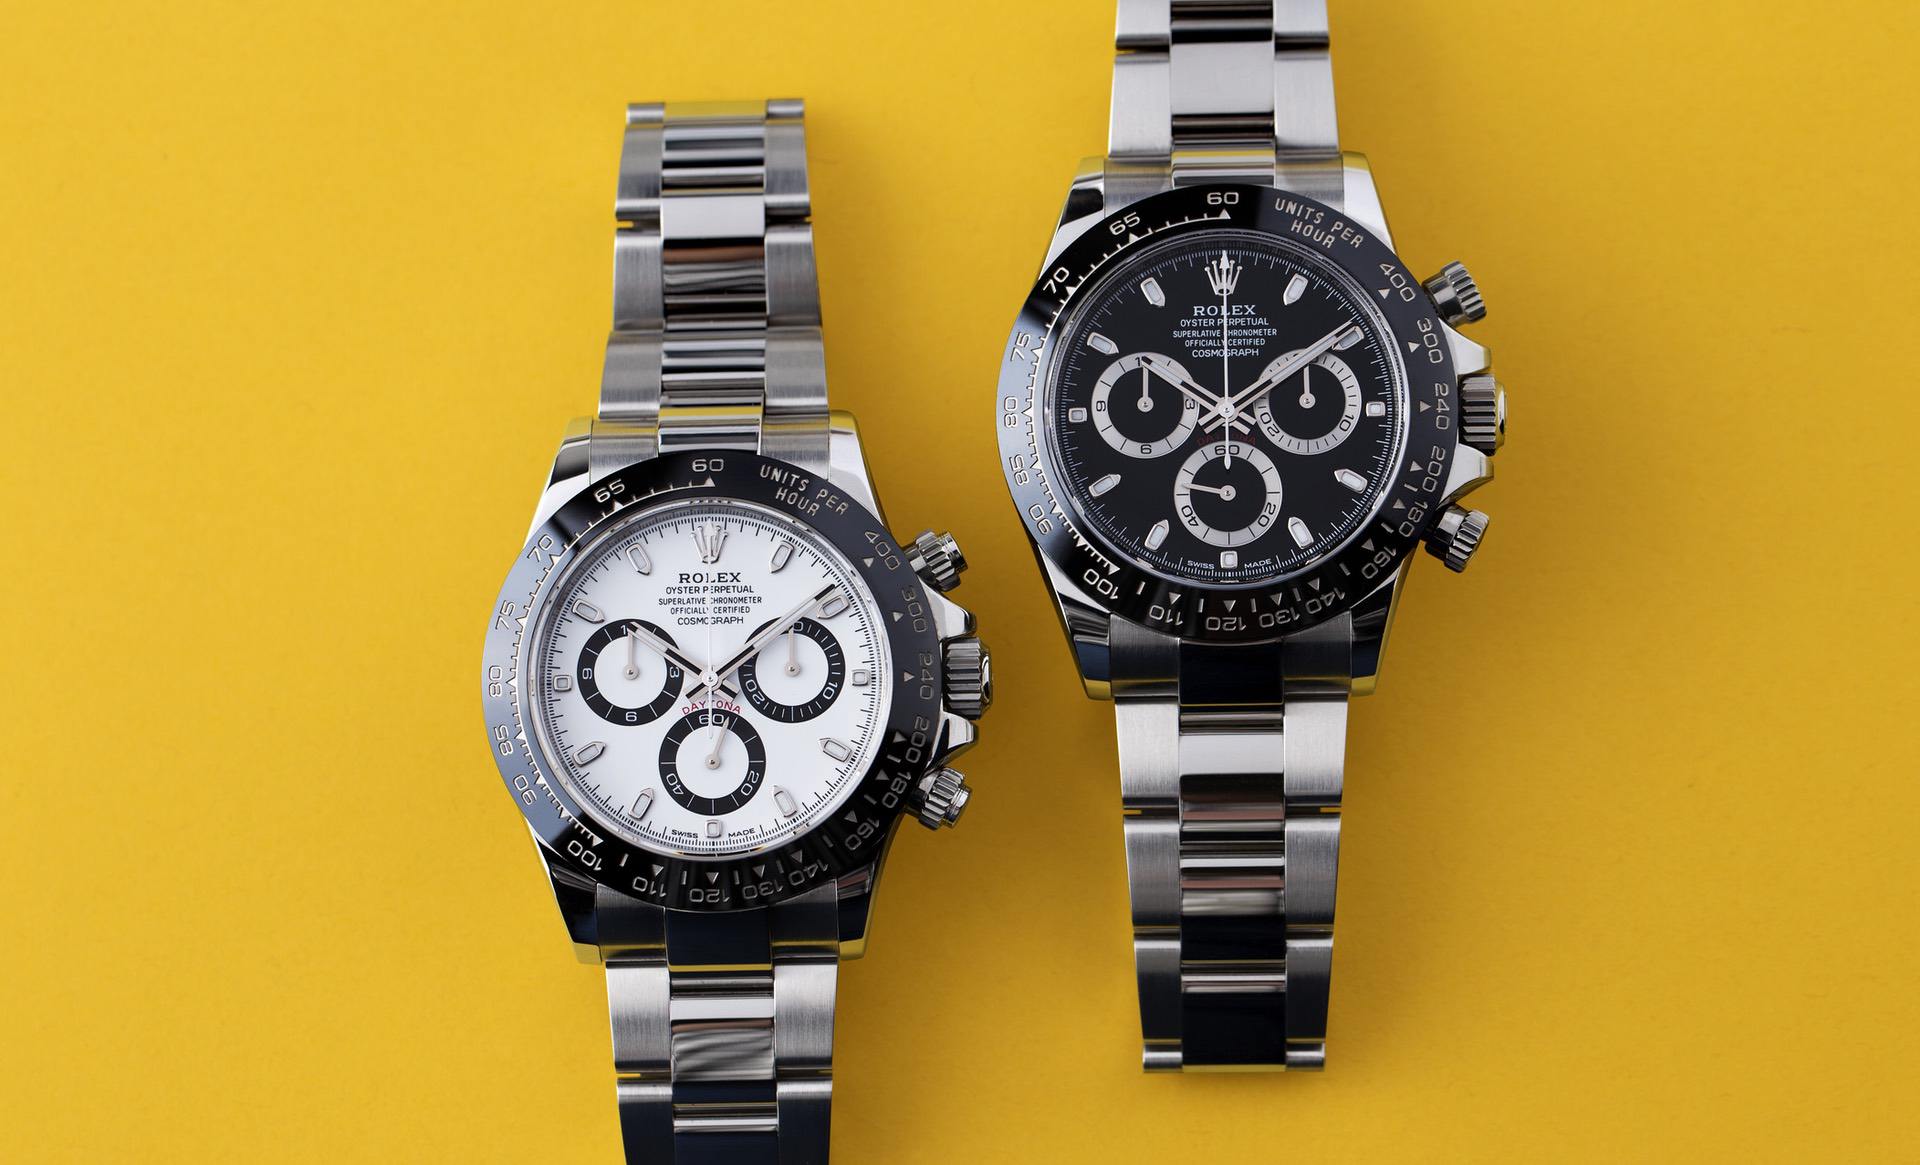 The Rolex Daytona: Combining Motorsport and Watches Since 1963